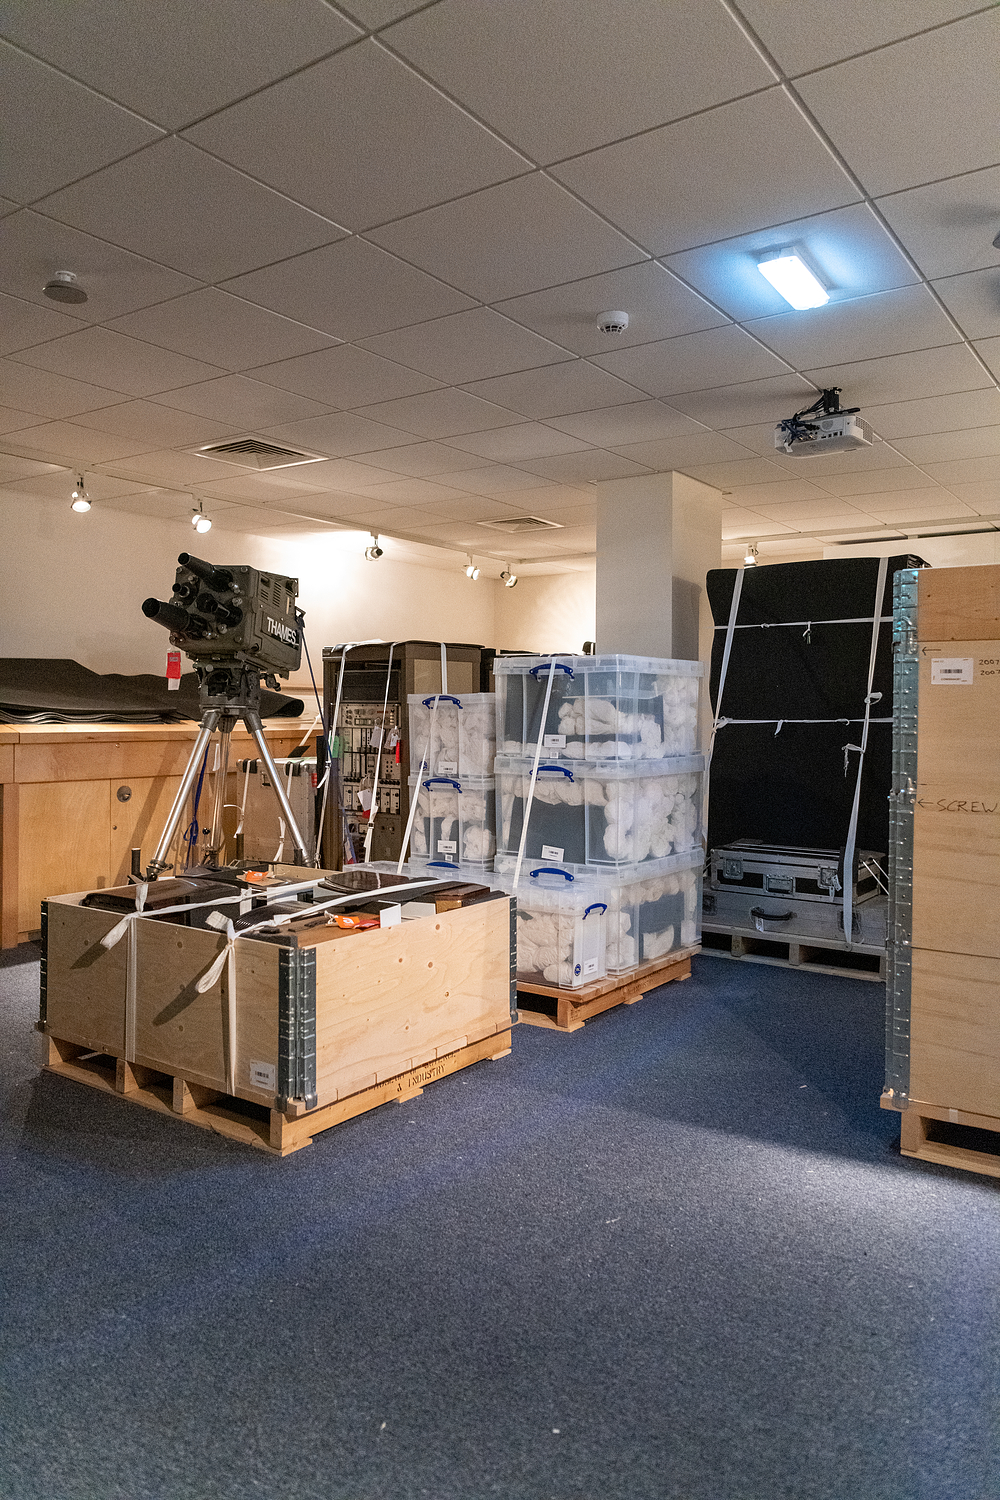 A room full of wooden and plastic crates full of museum objects, with a tv camera balance on top one of the boxes